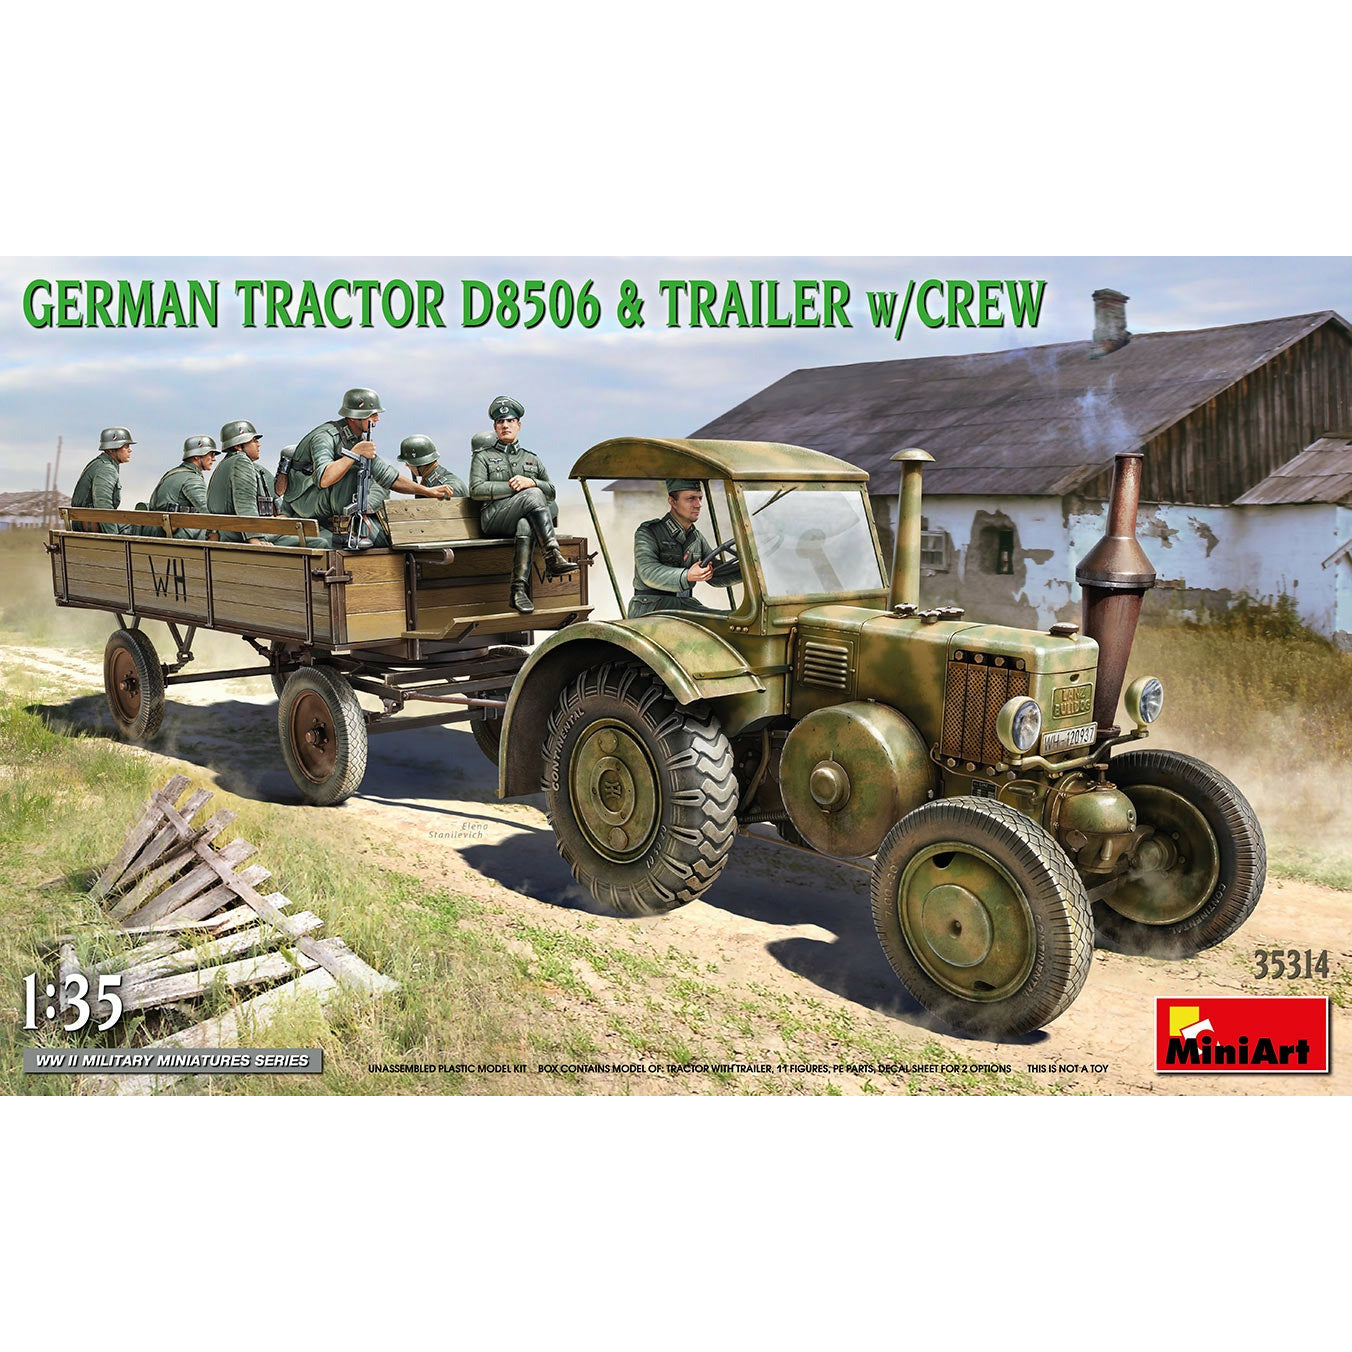 German Tractor D8506 with Trailer & Crew 1/35 #35314 by Miniart